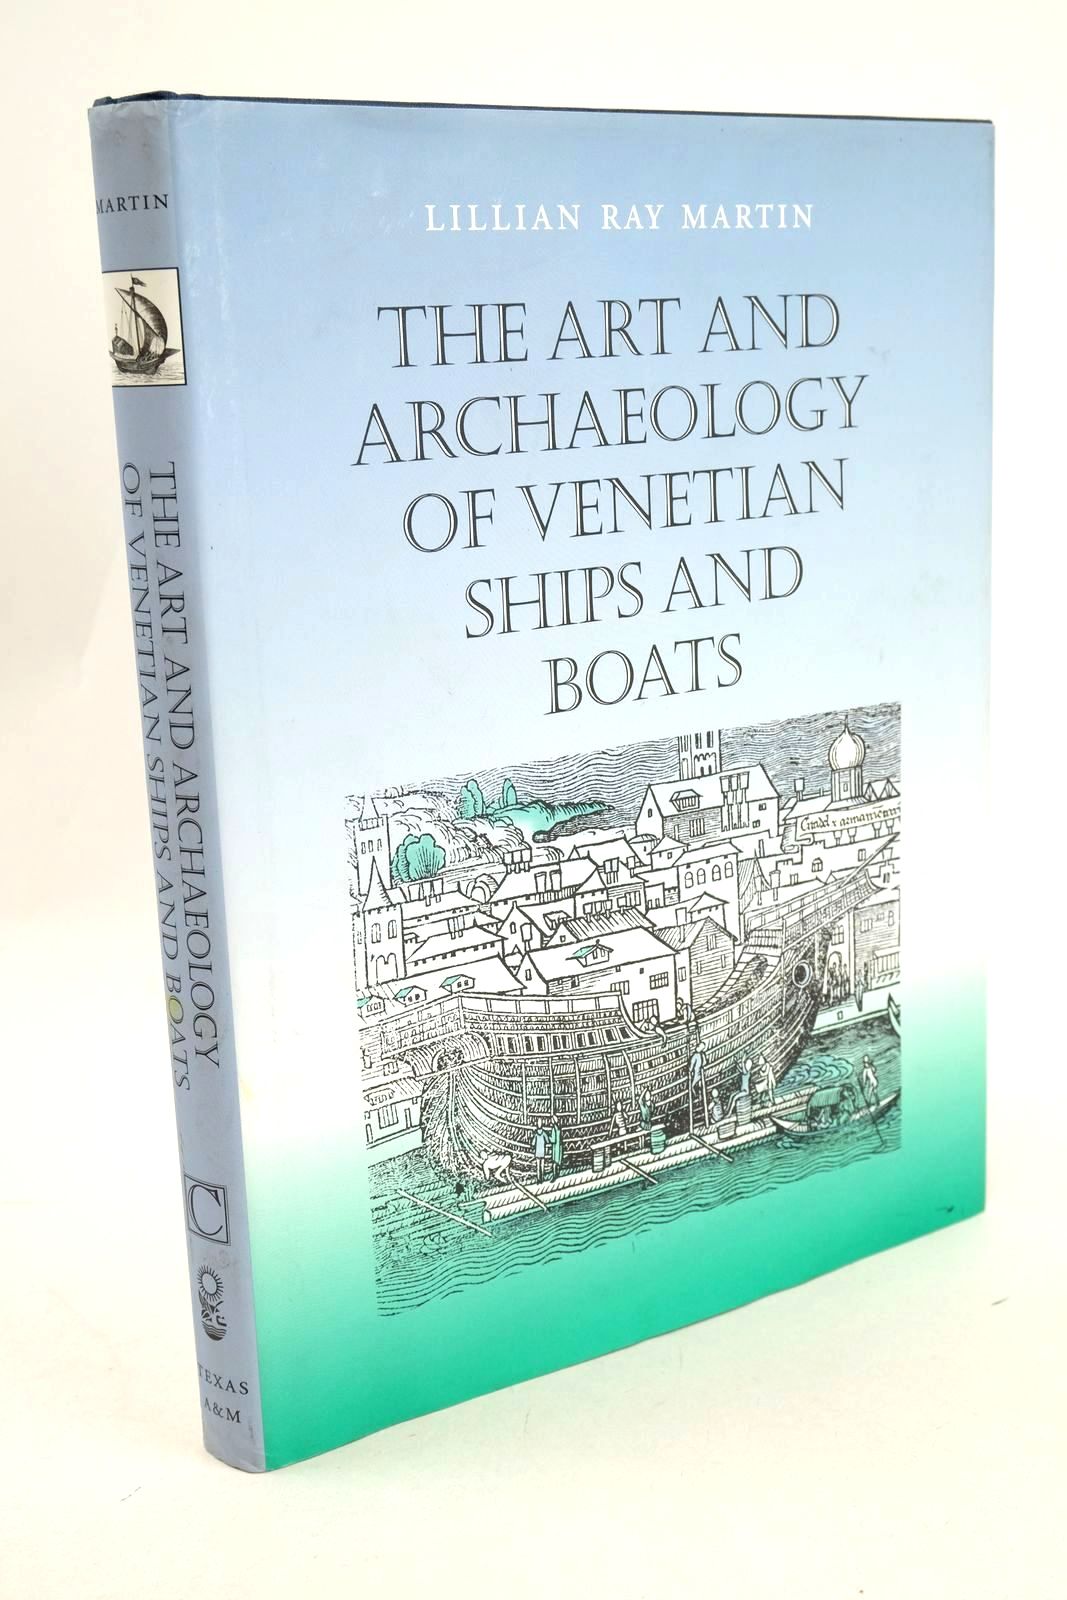 Photo of THE ART AND ARCHAEOLOGY OF VENETIAN SHIPS AND BOATS written by Martin, Lillian Ray published by Chatham Publishing (STOCK CODE: 1327133)  for sale by Stella & Rose's Books